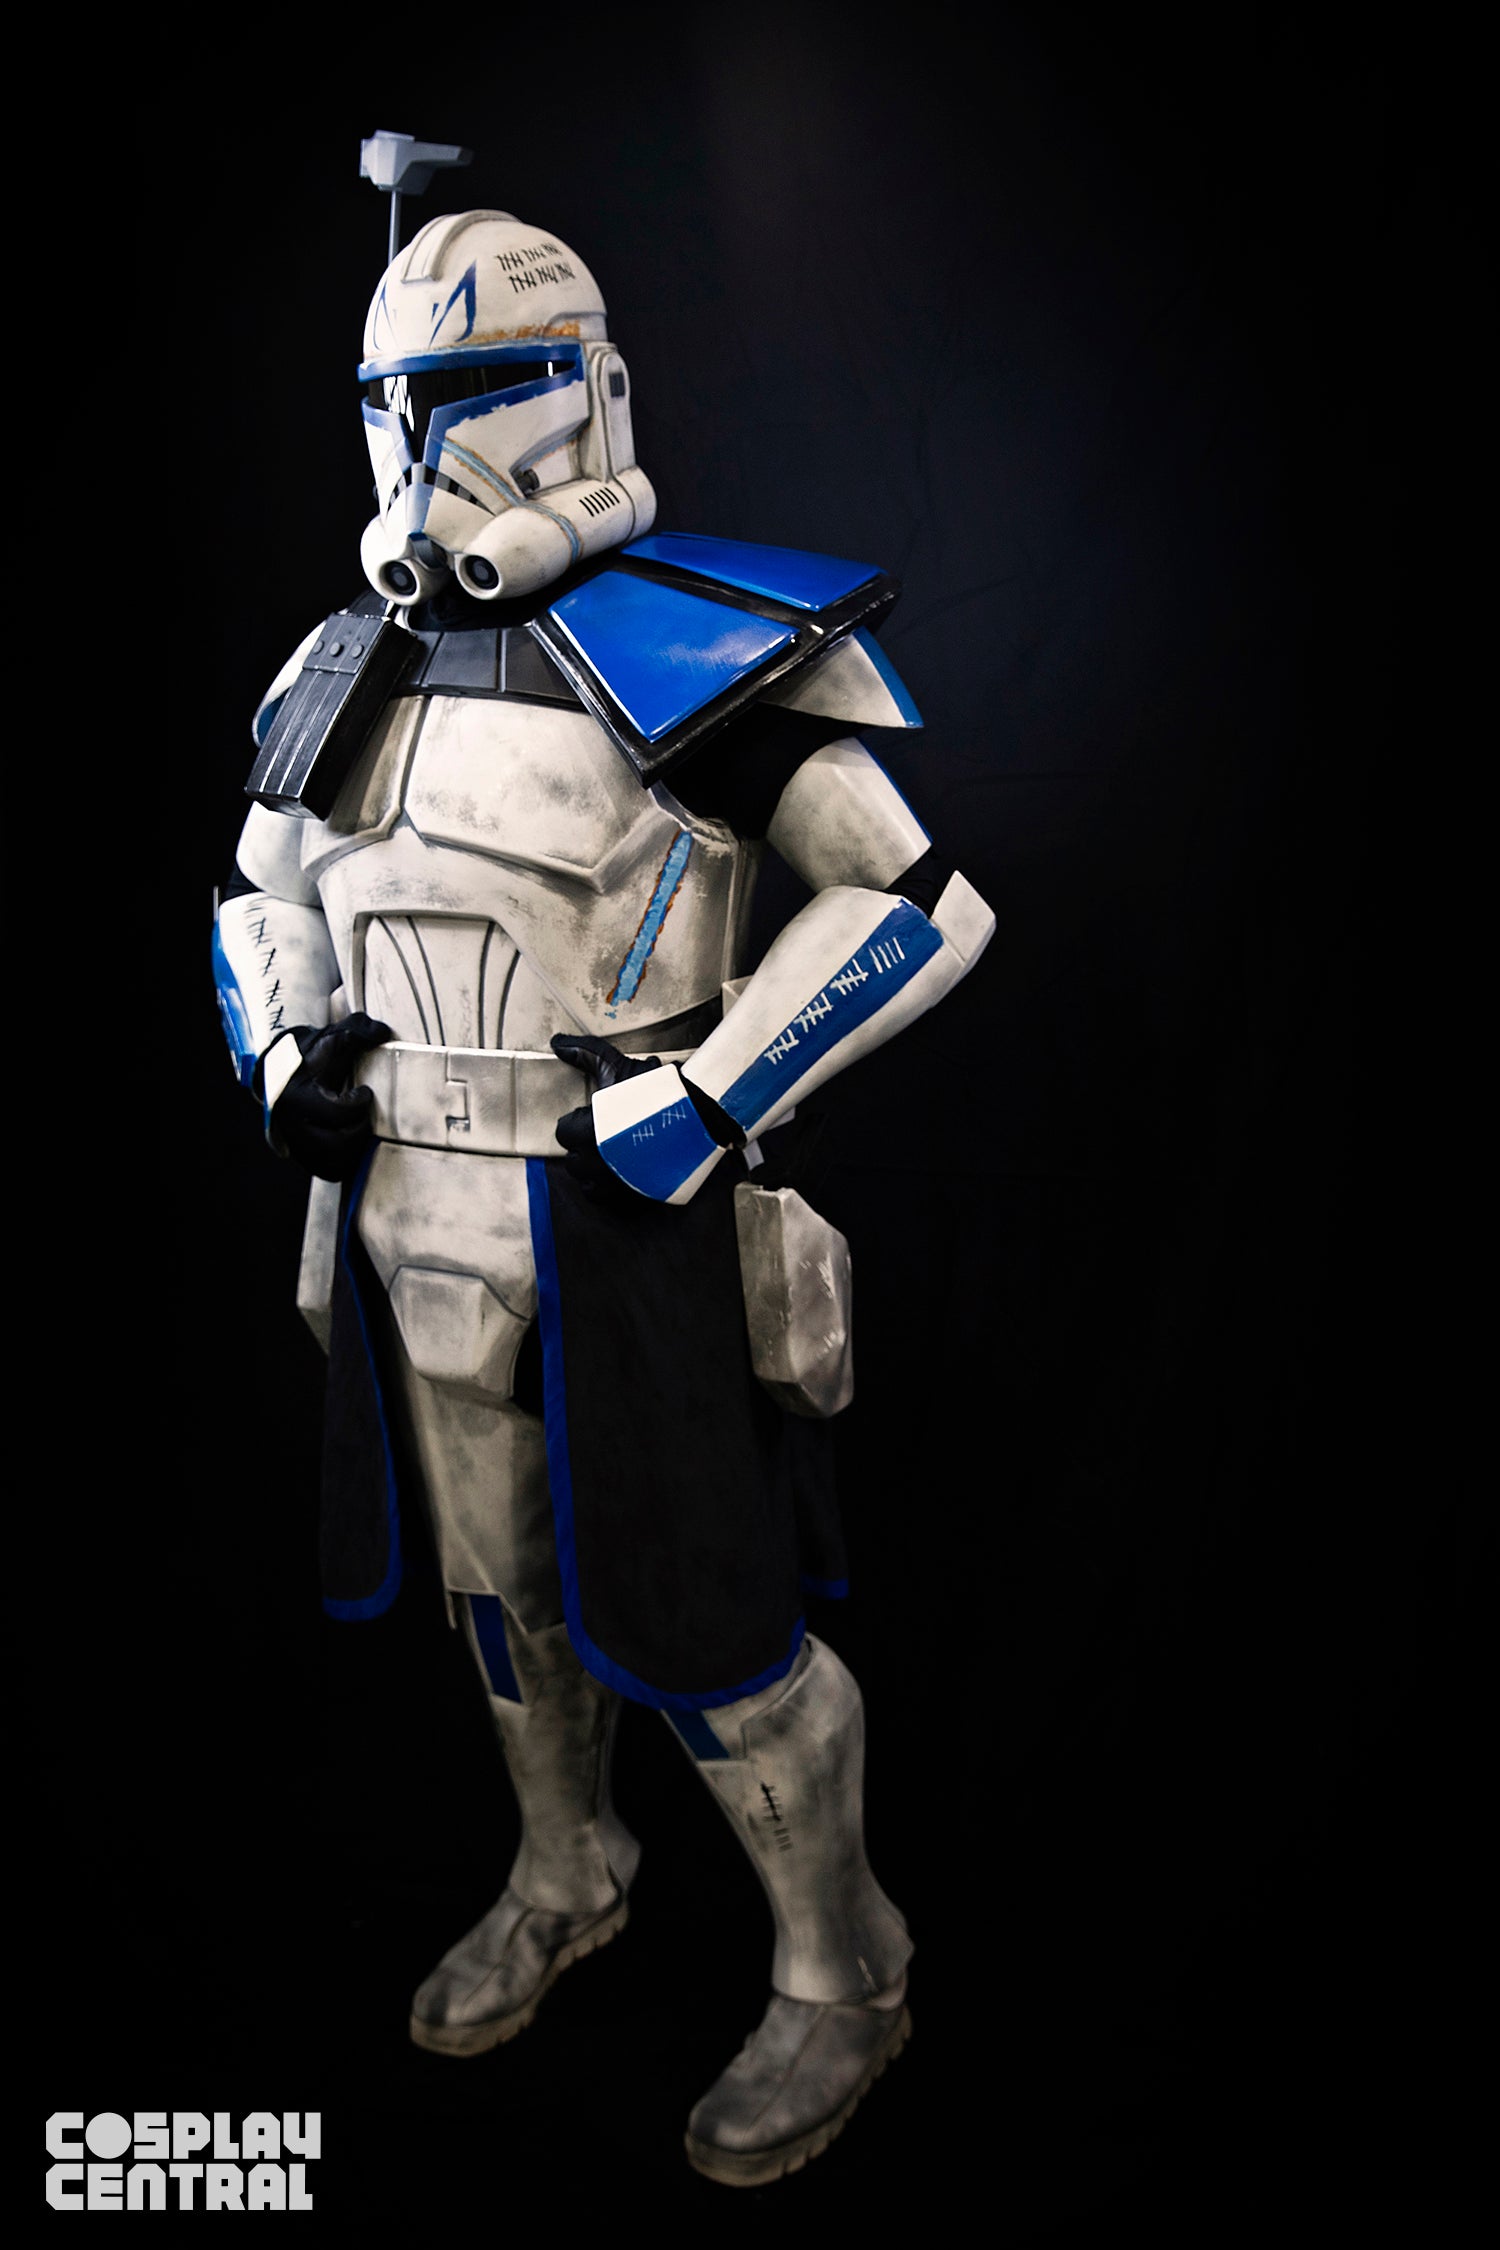 Captain Rex cosplay from New York Comic Con 2019